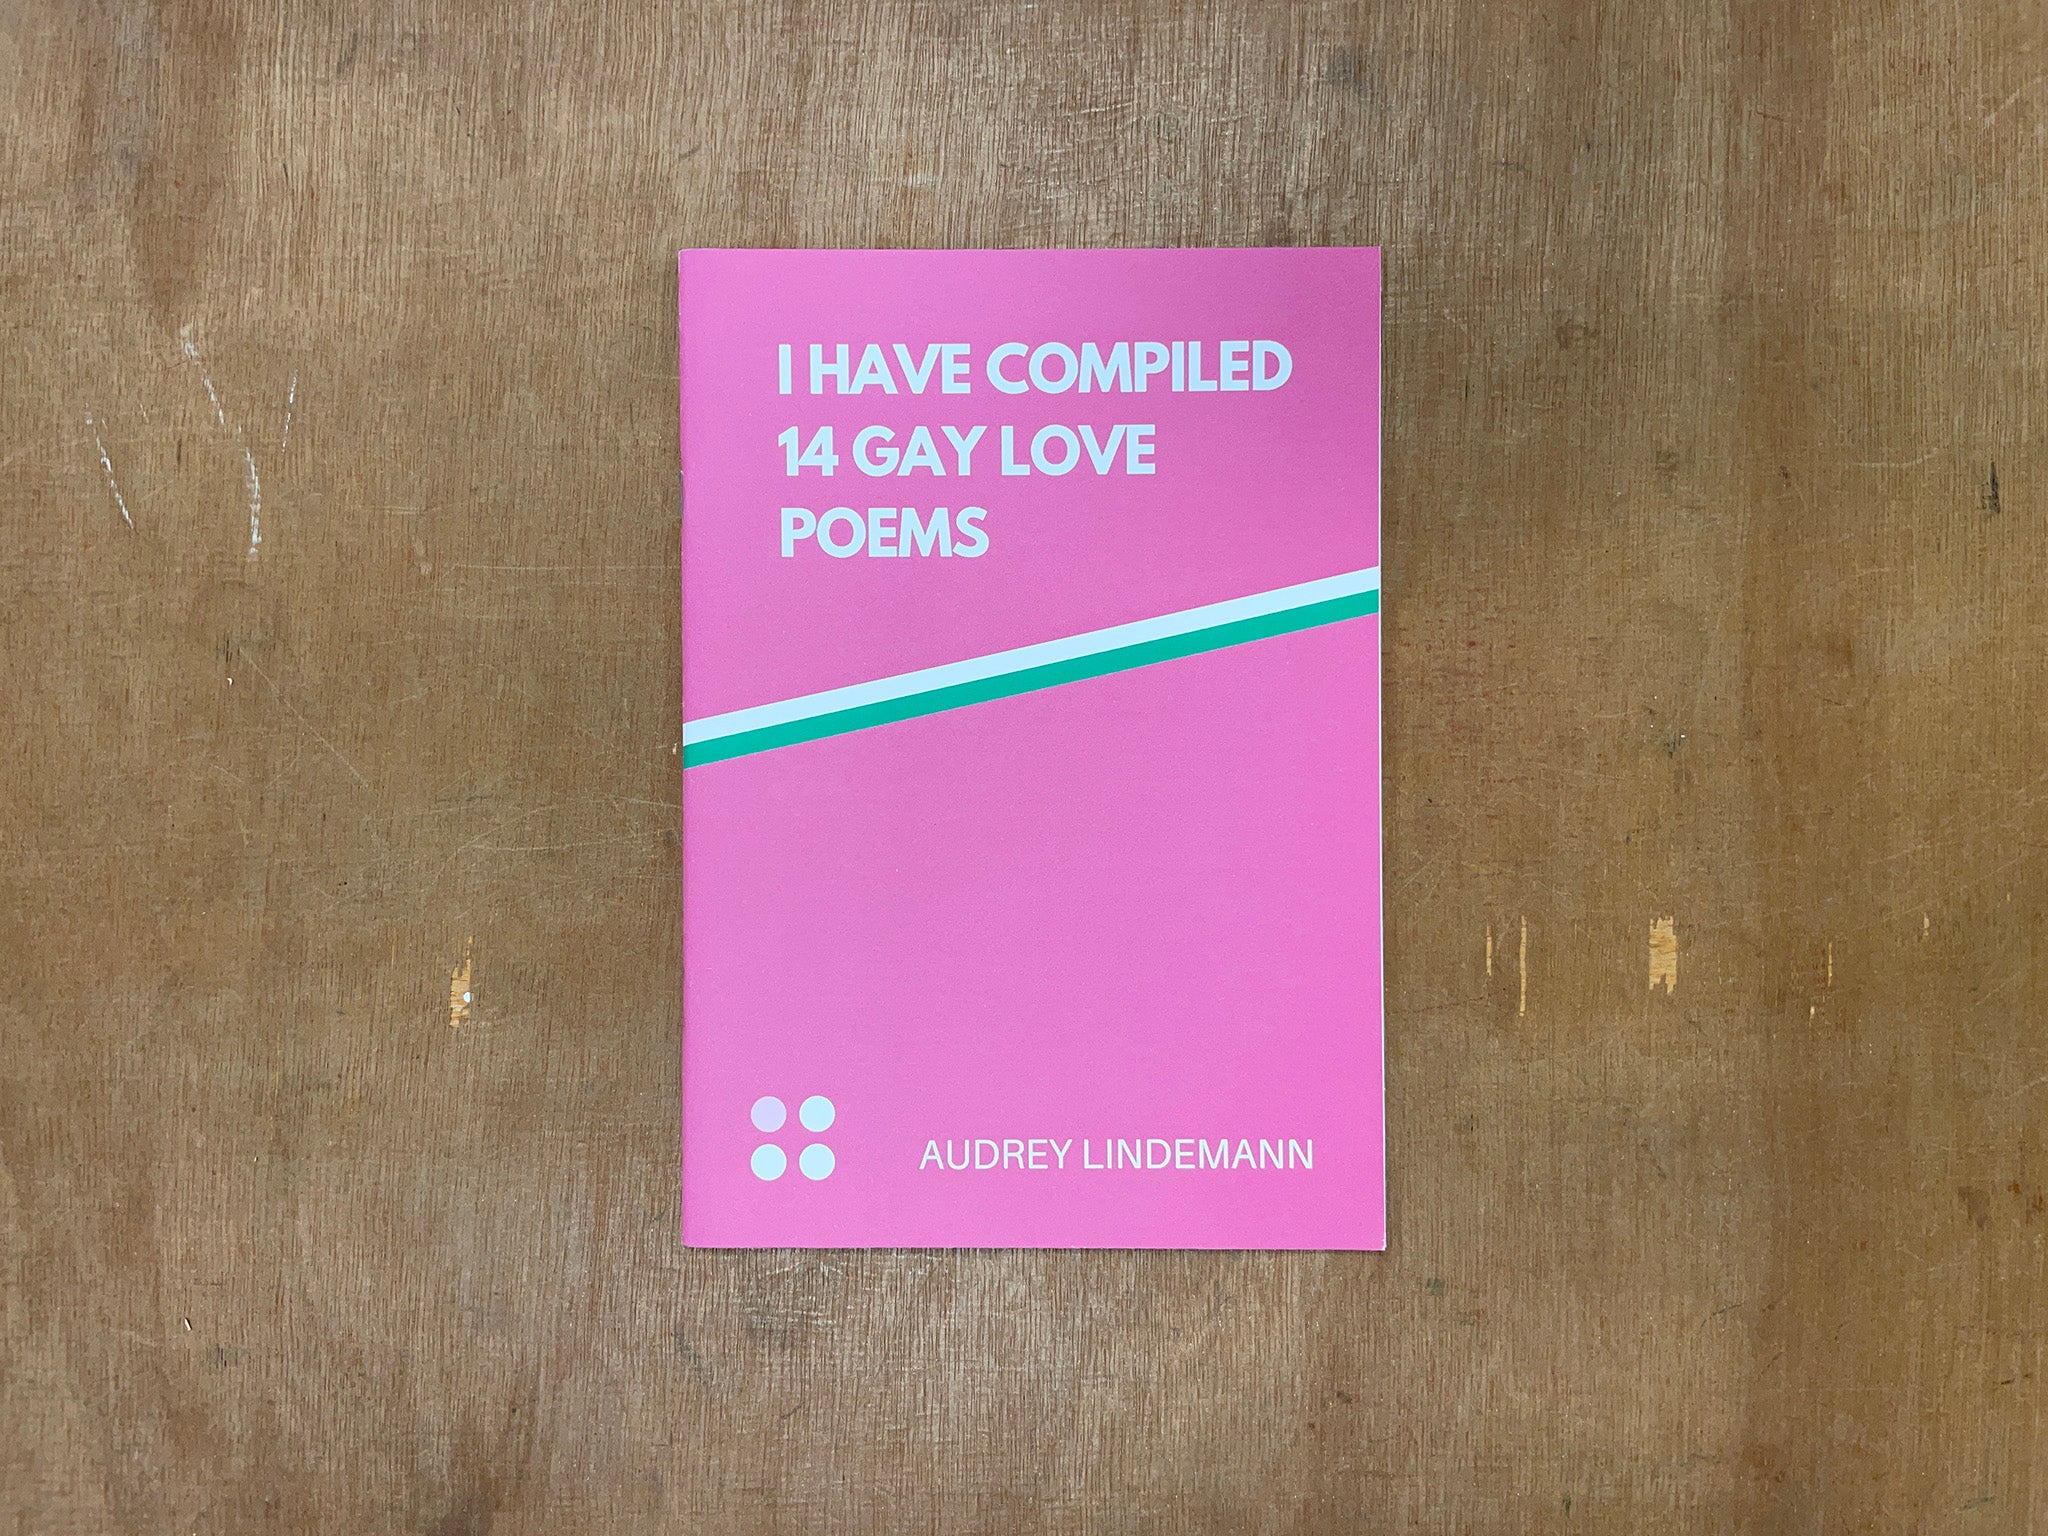 I HAVE COMPILED 14 GAY LOVE POEMS by Audrey Lindemann